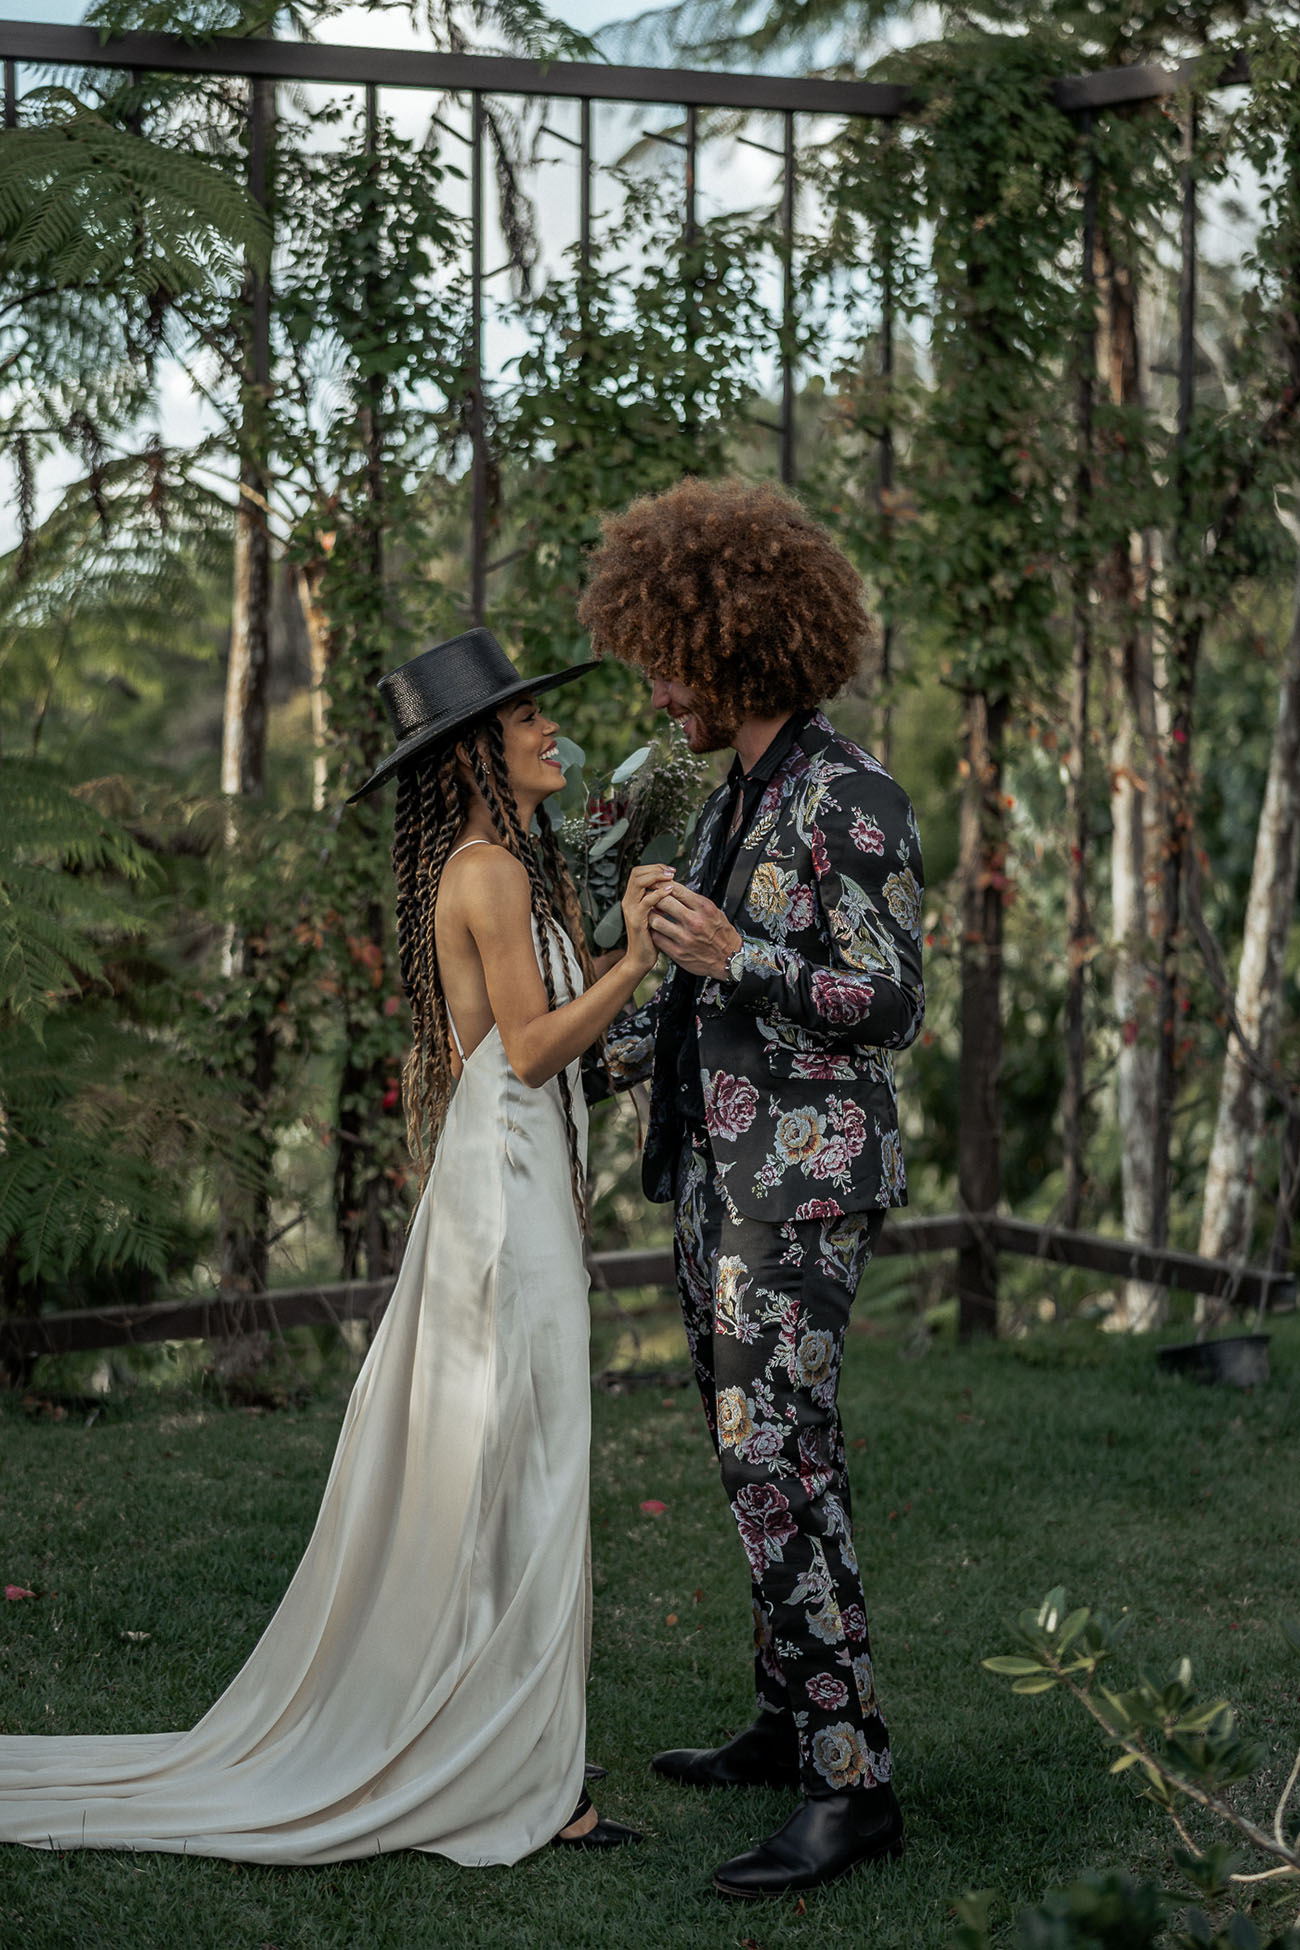 The groom was wearing a black floral suit, a black shirt and boots and his Afro hair perfectly finished off his look